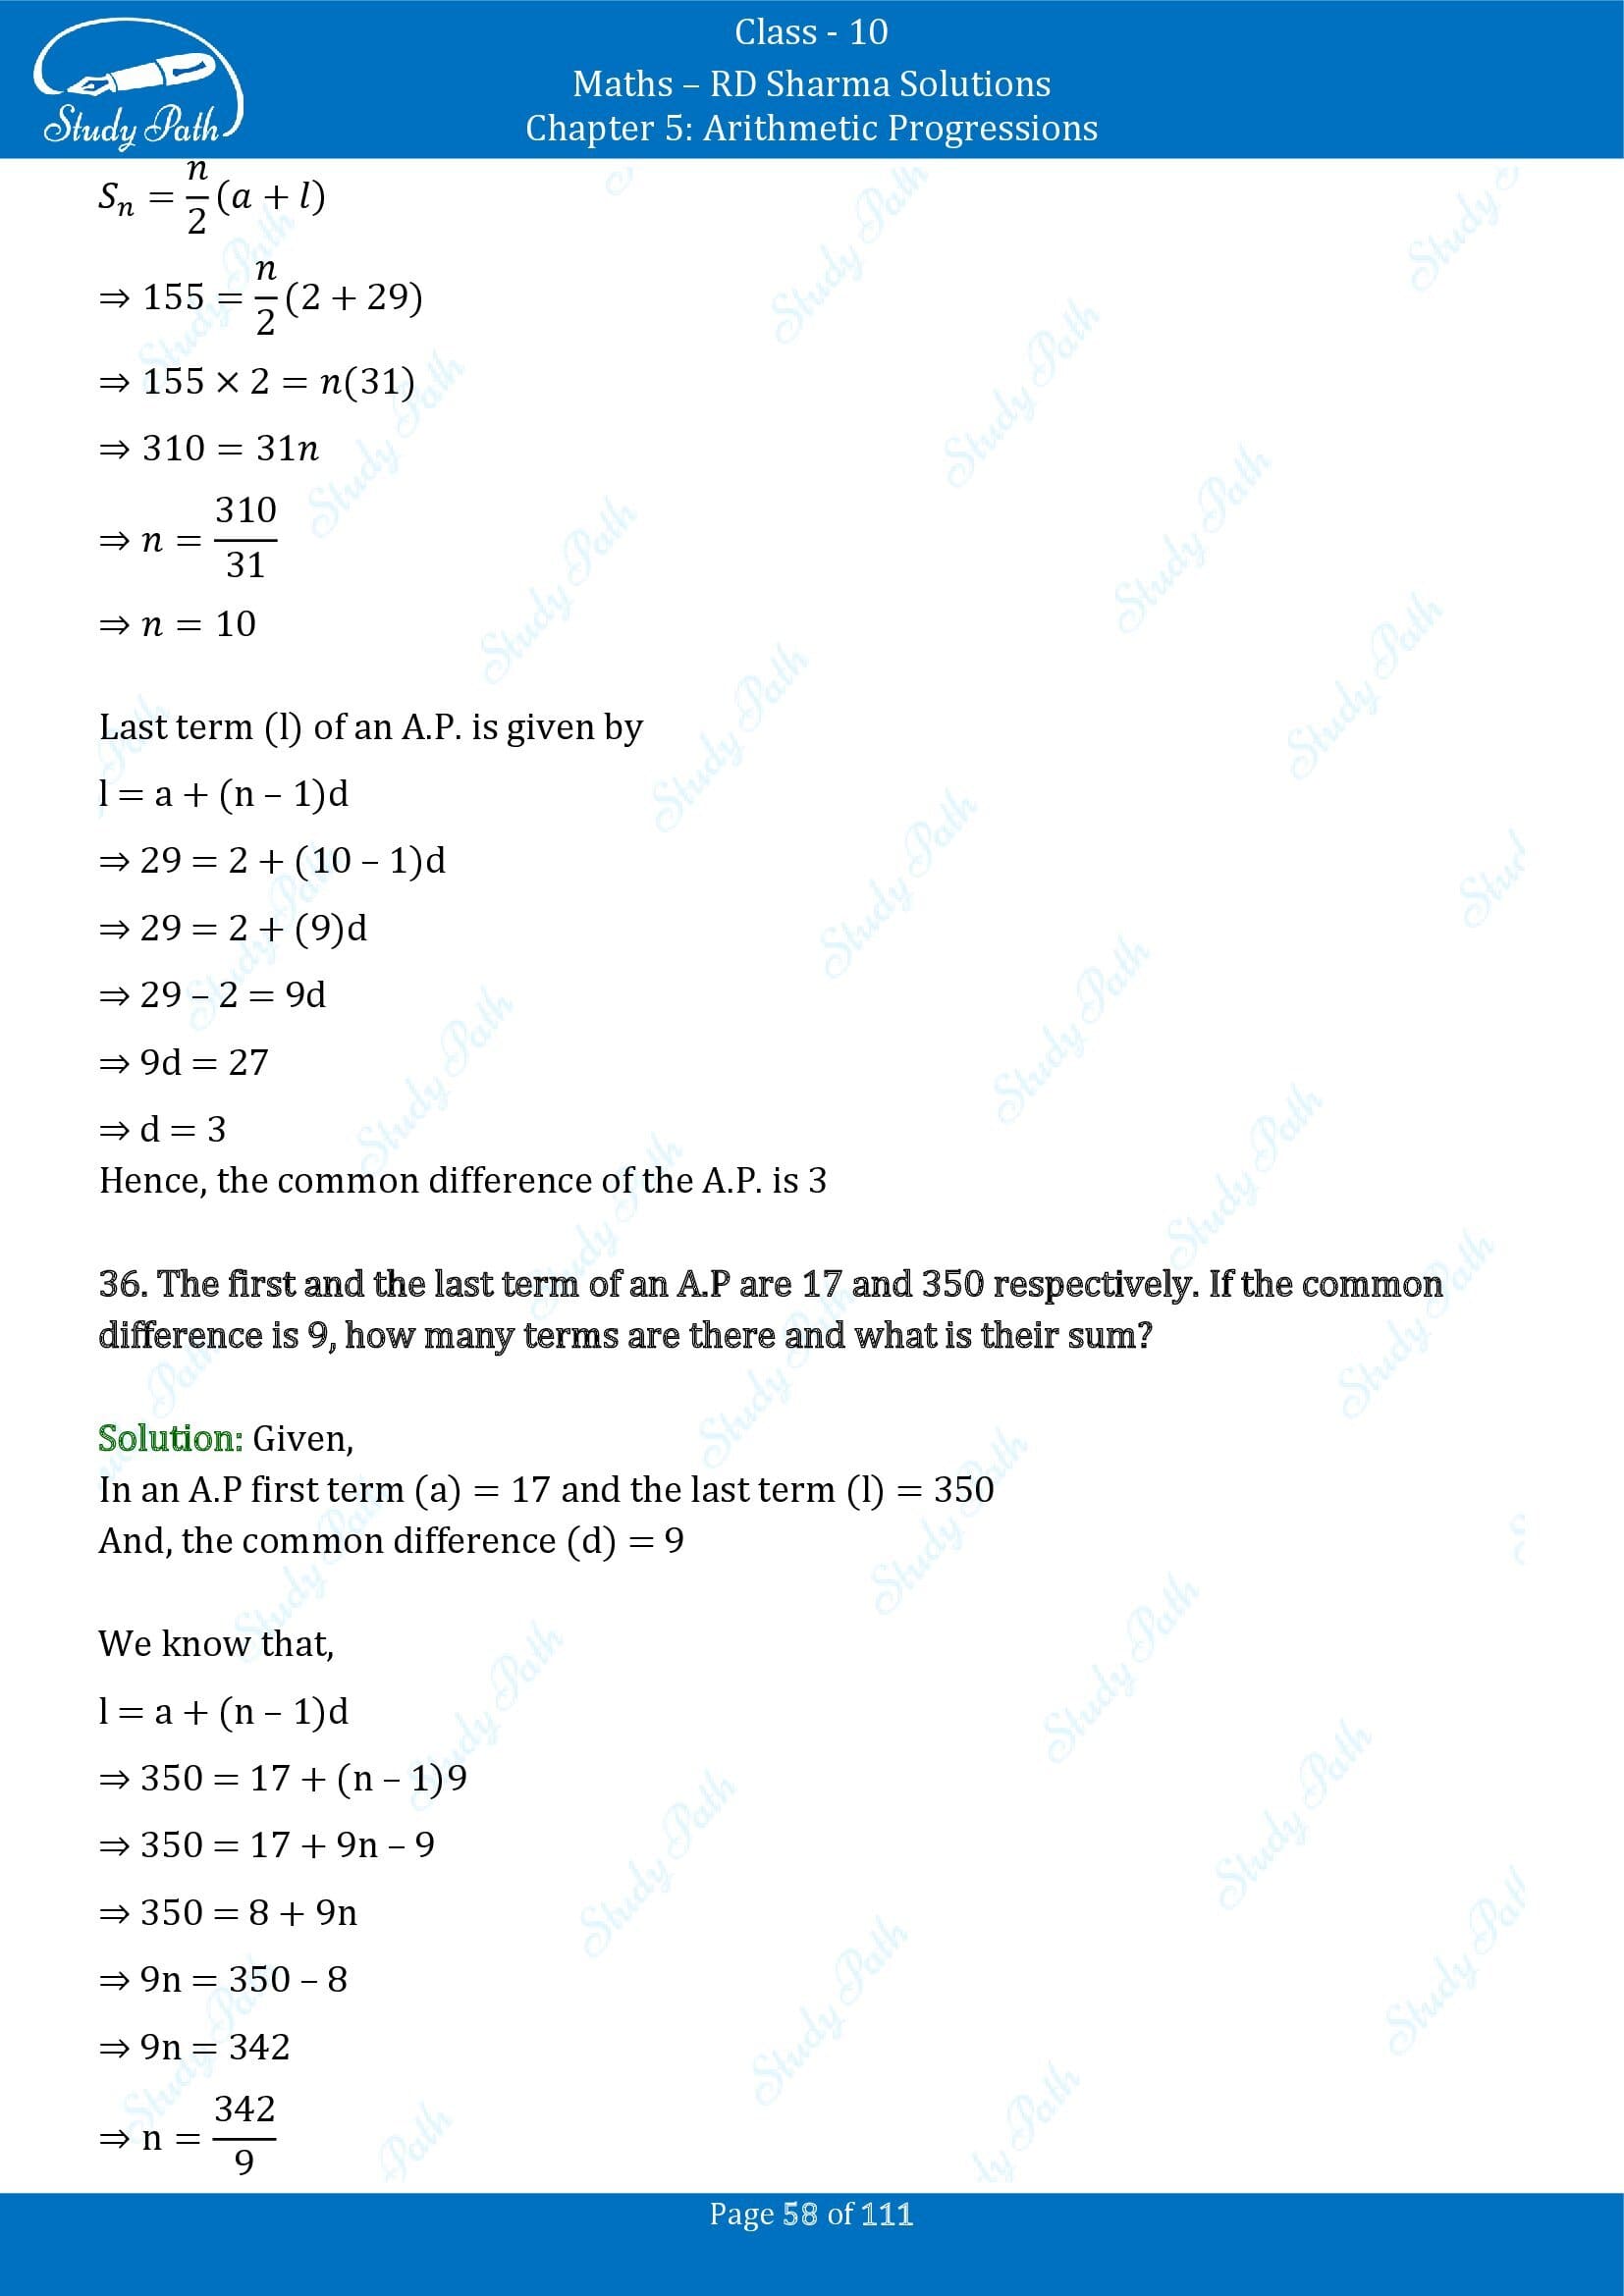 RD Sharma Solutions Class 10 Chapter 5 Arithmetic Progressions Exercise 5.6 00058